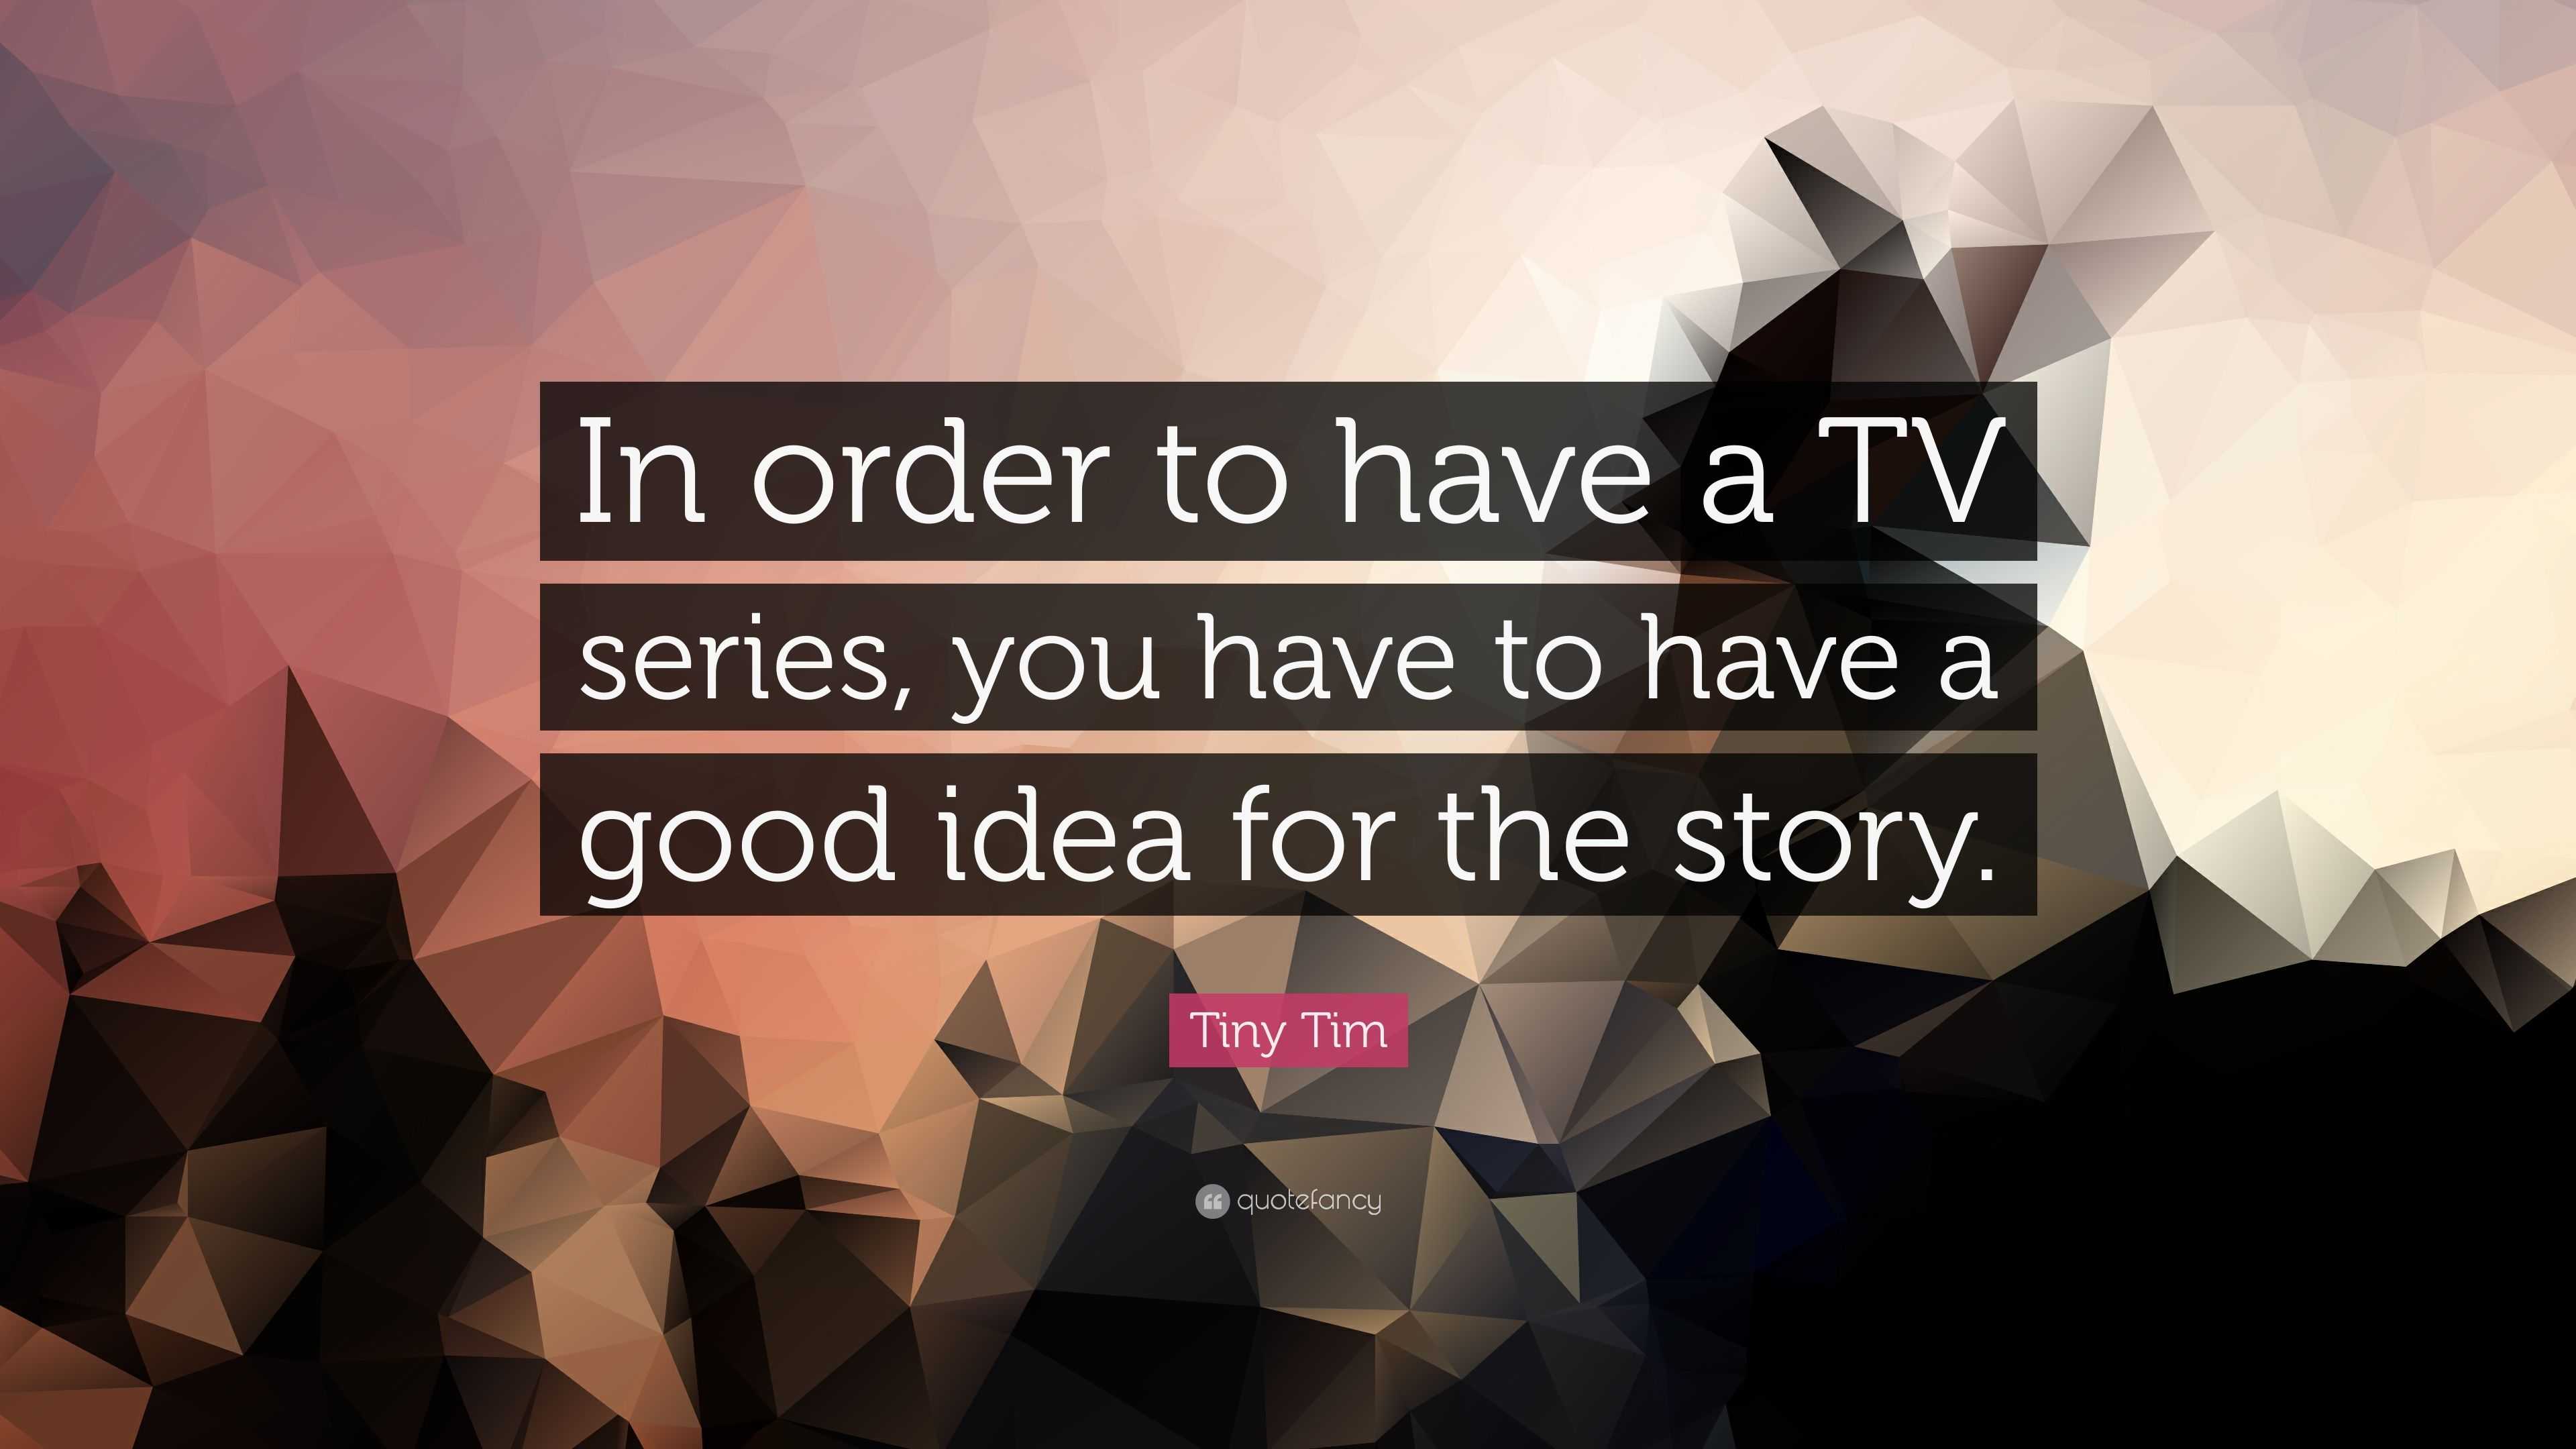 Tiny Tim Quote: "In order to have a TV series, you have to ...